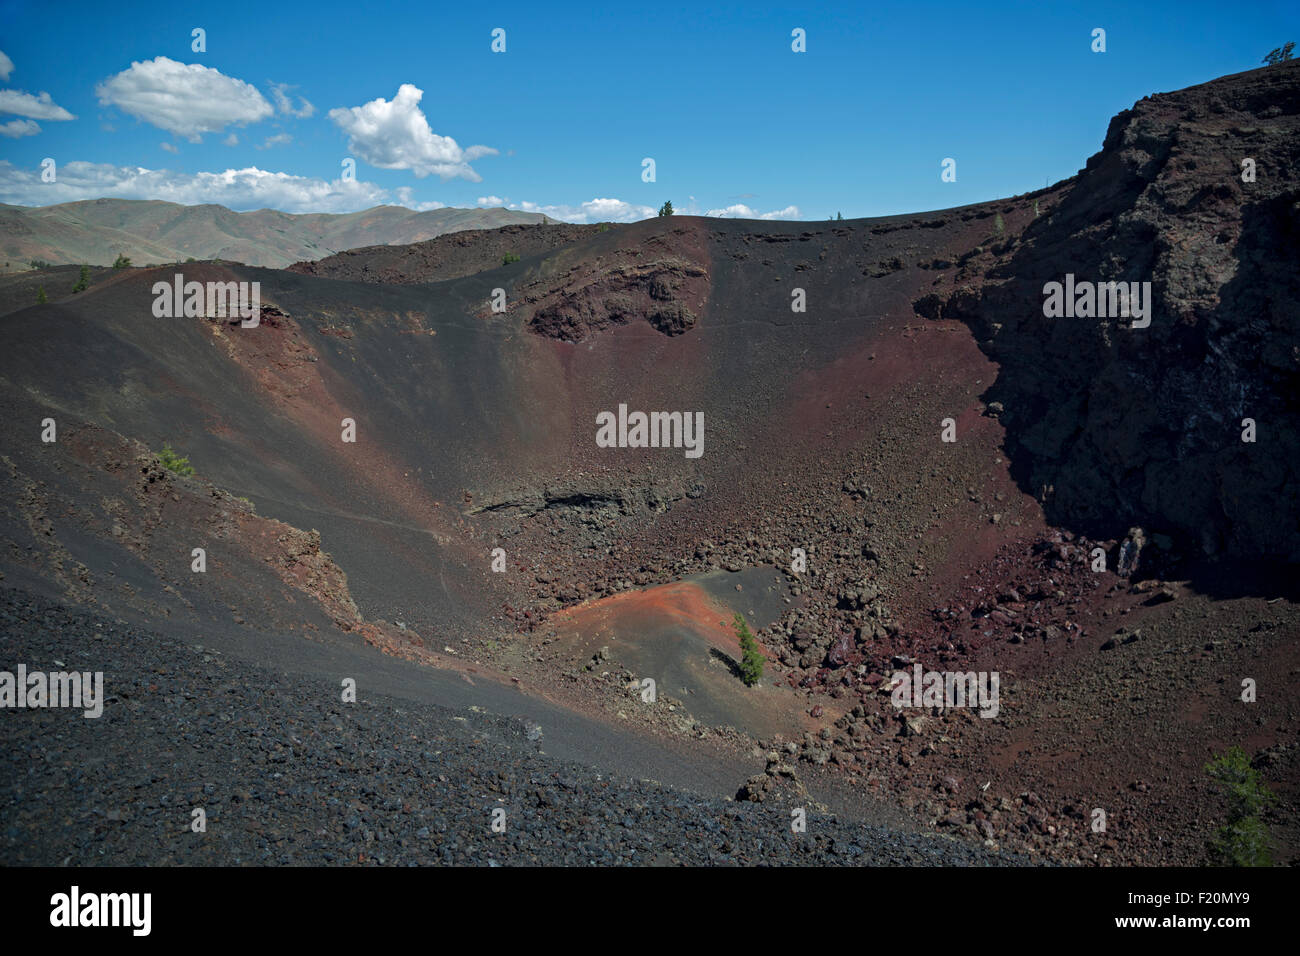 Arco, Idaho - Craters of the Moon National Monument. Stock Photo